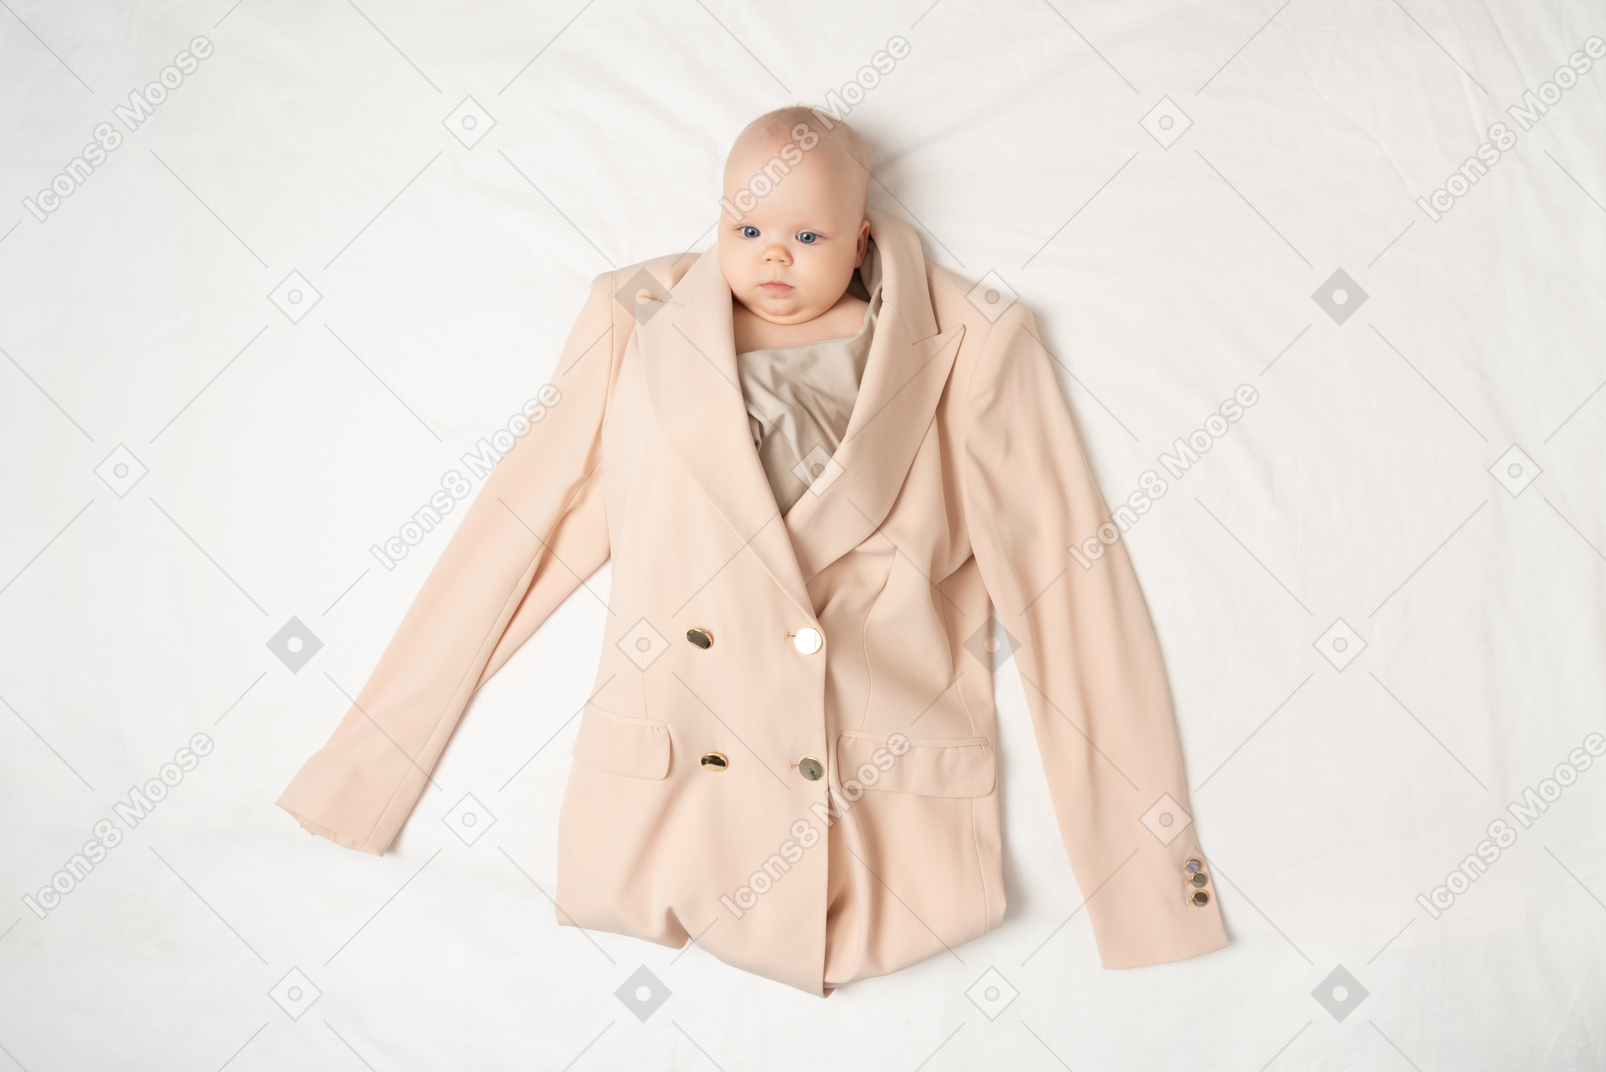 Baby girl in adult's jacket and blouse